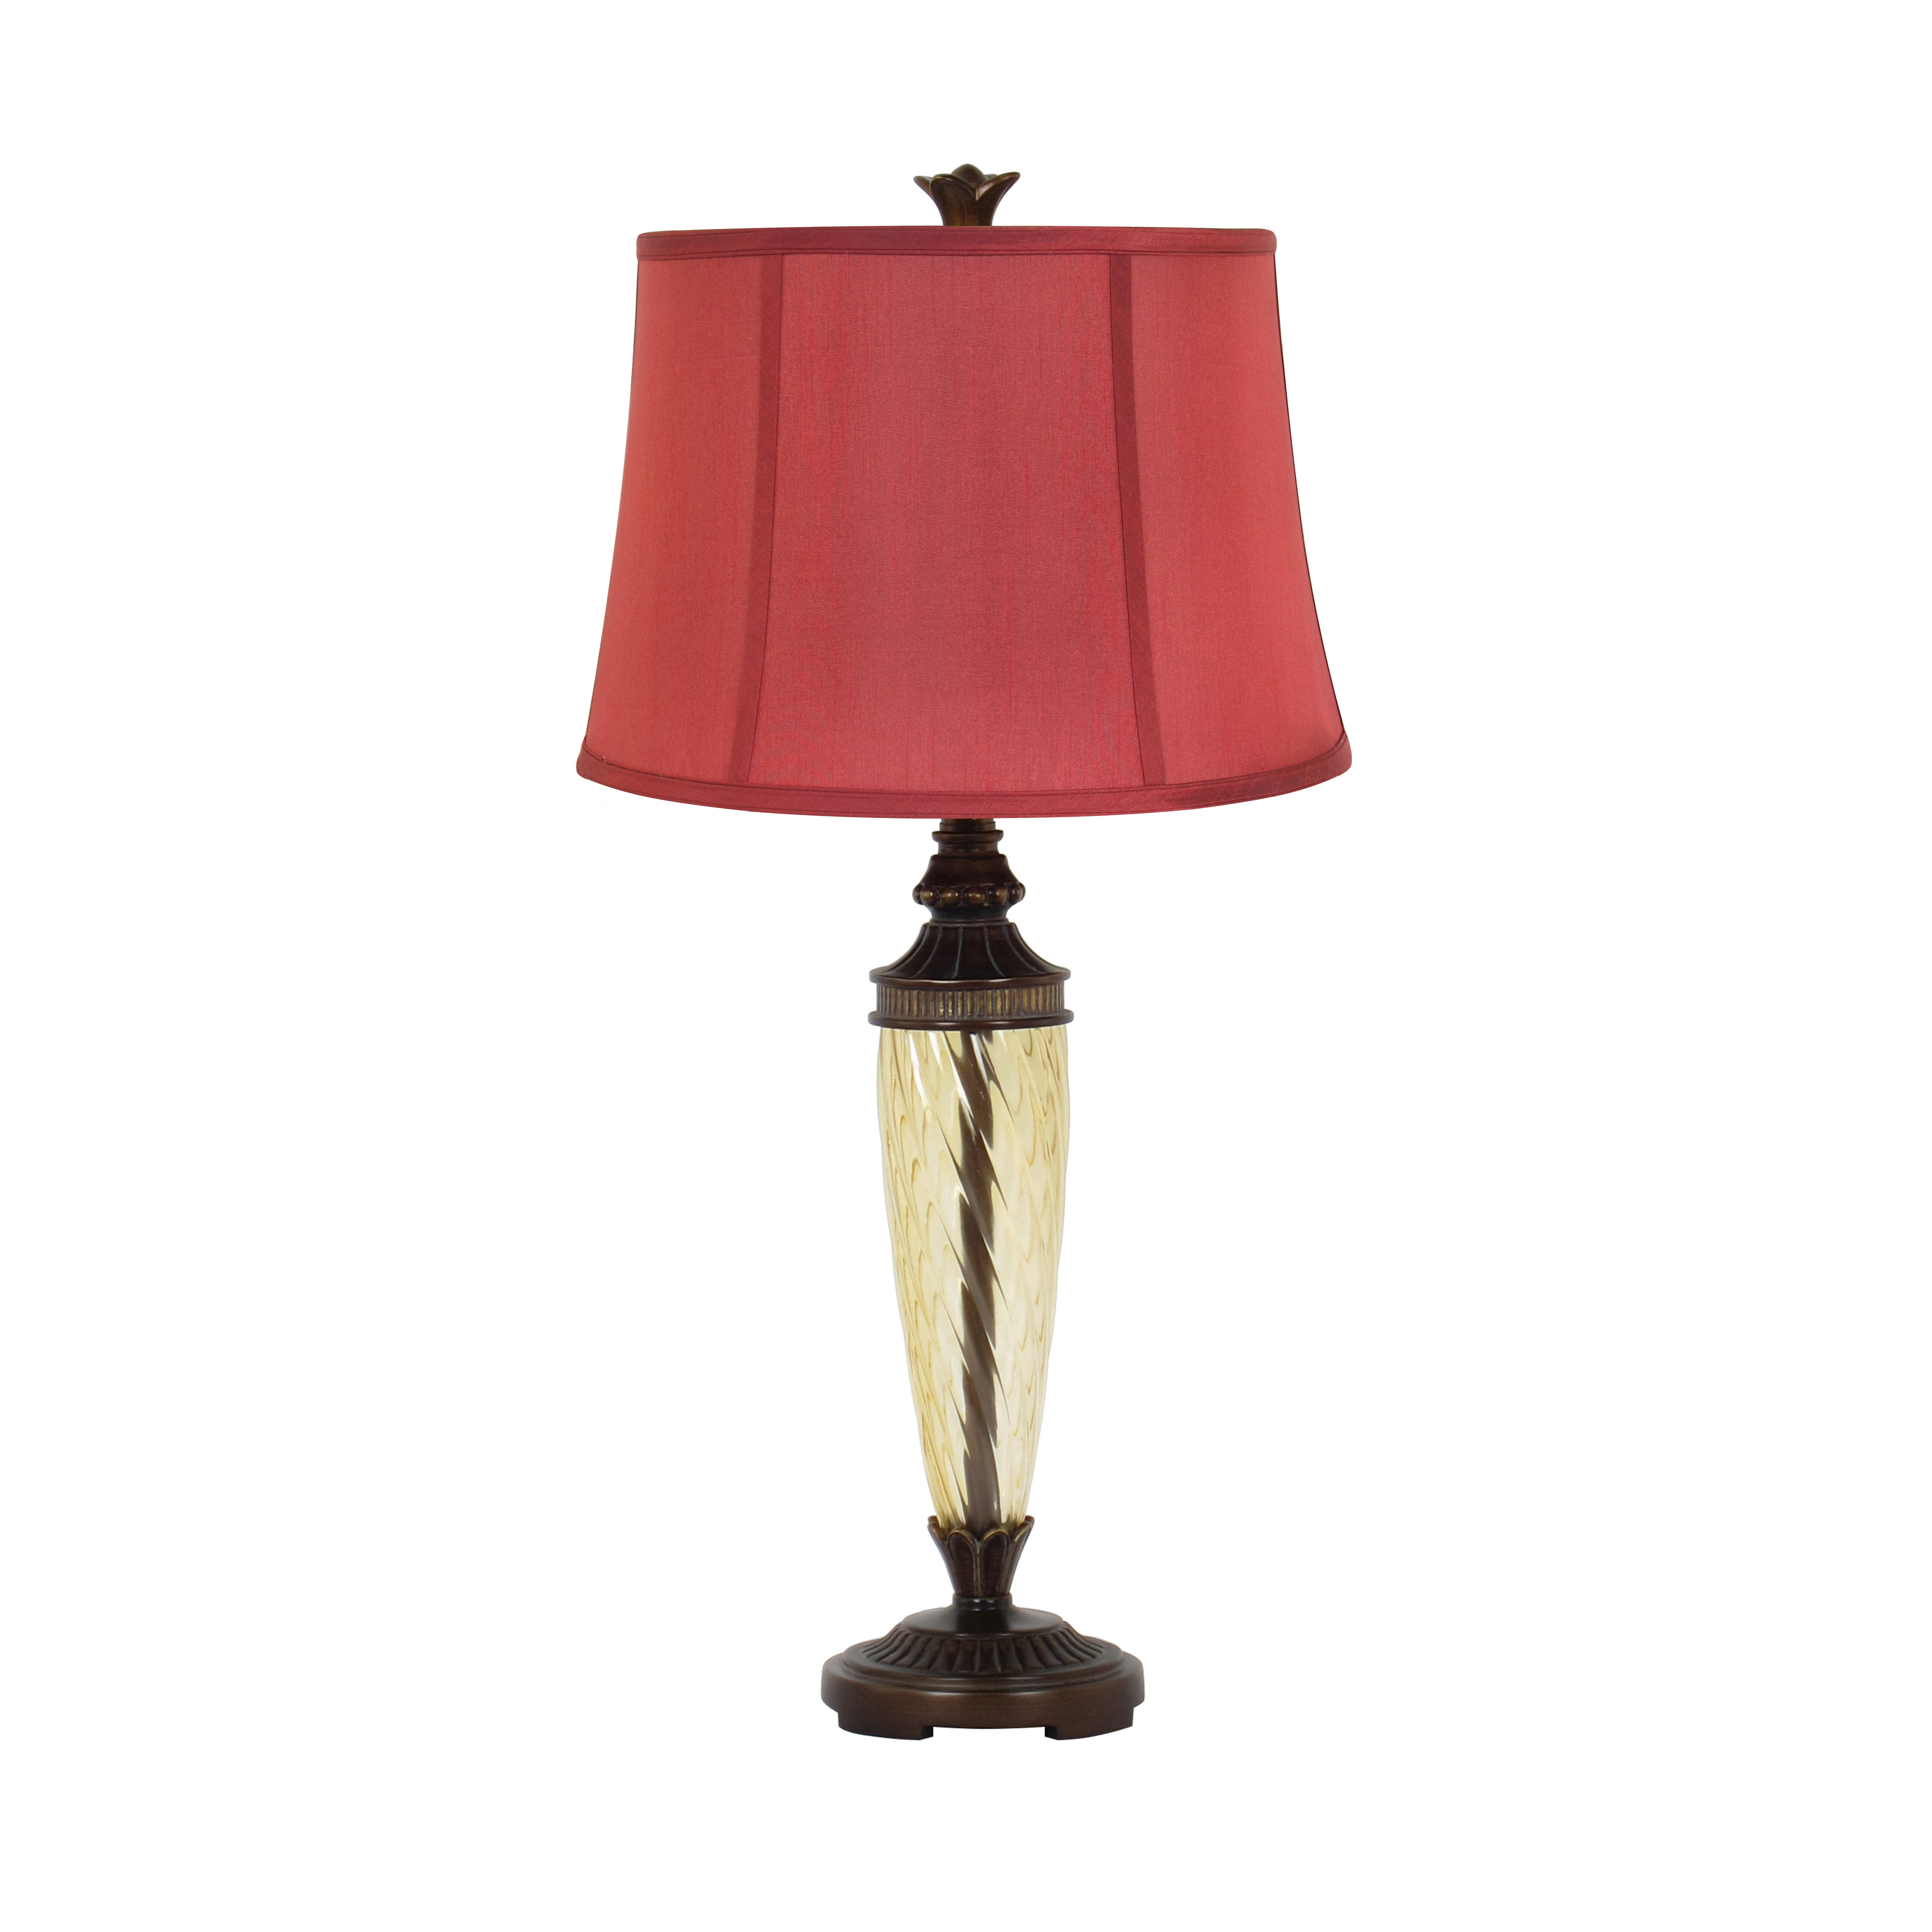 Legacy Home Furnishing and Decor 28" Dark Bronze Table Lamp With Red Linen Bell Shade